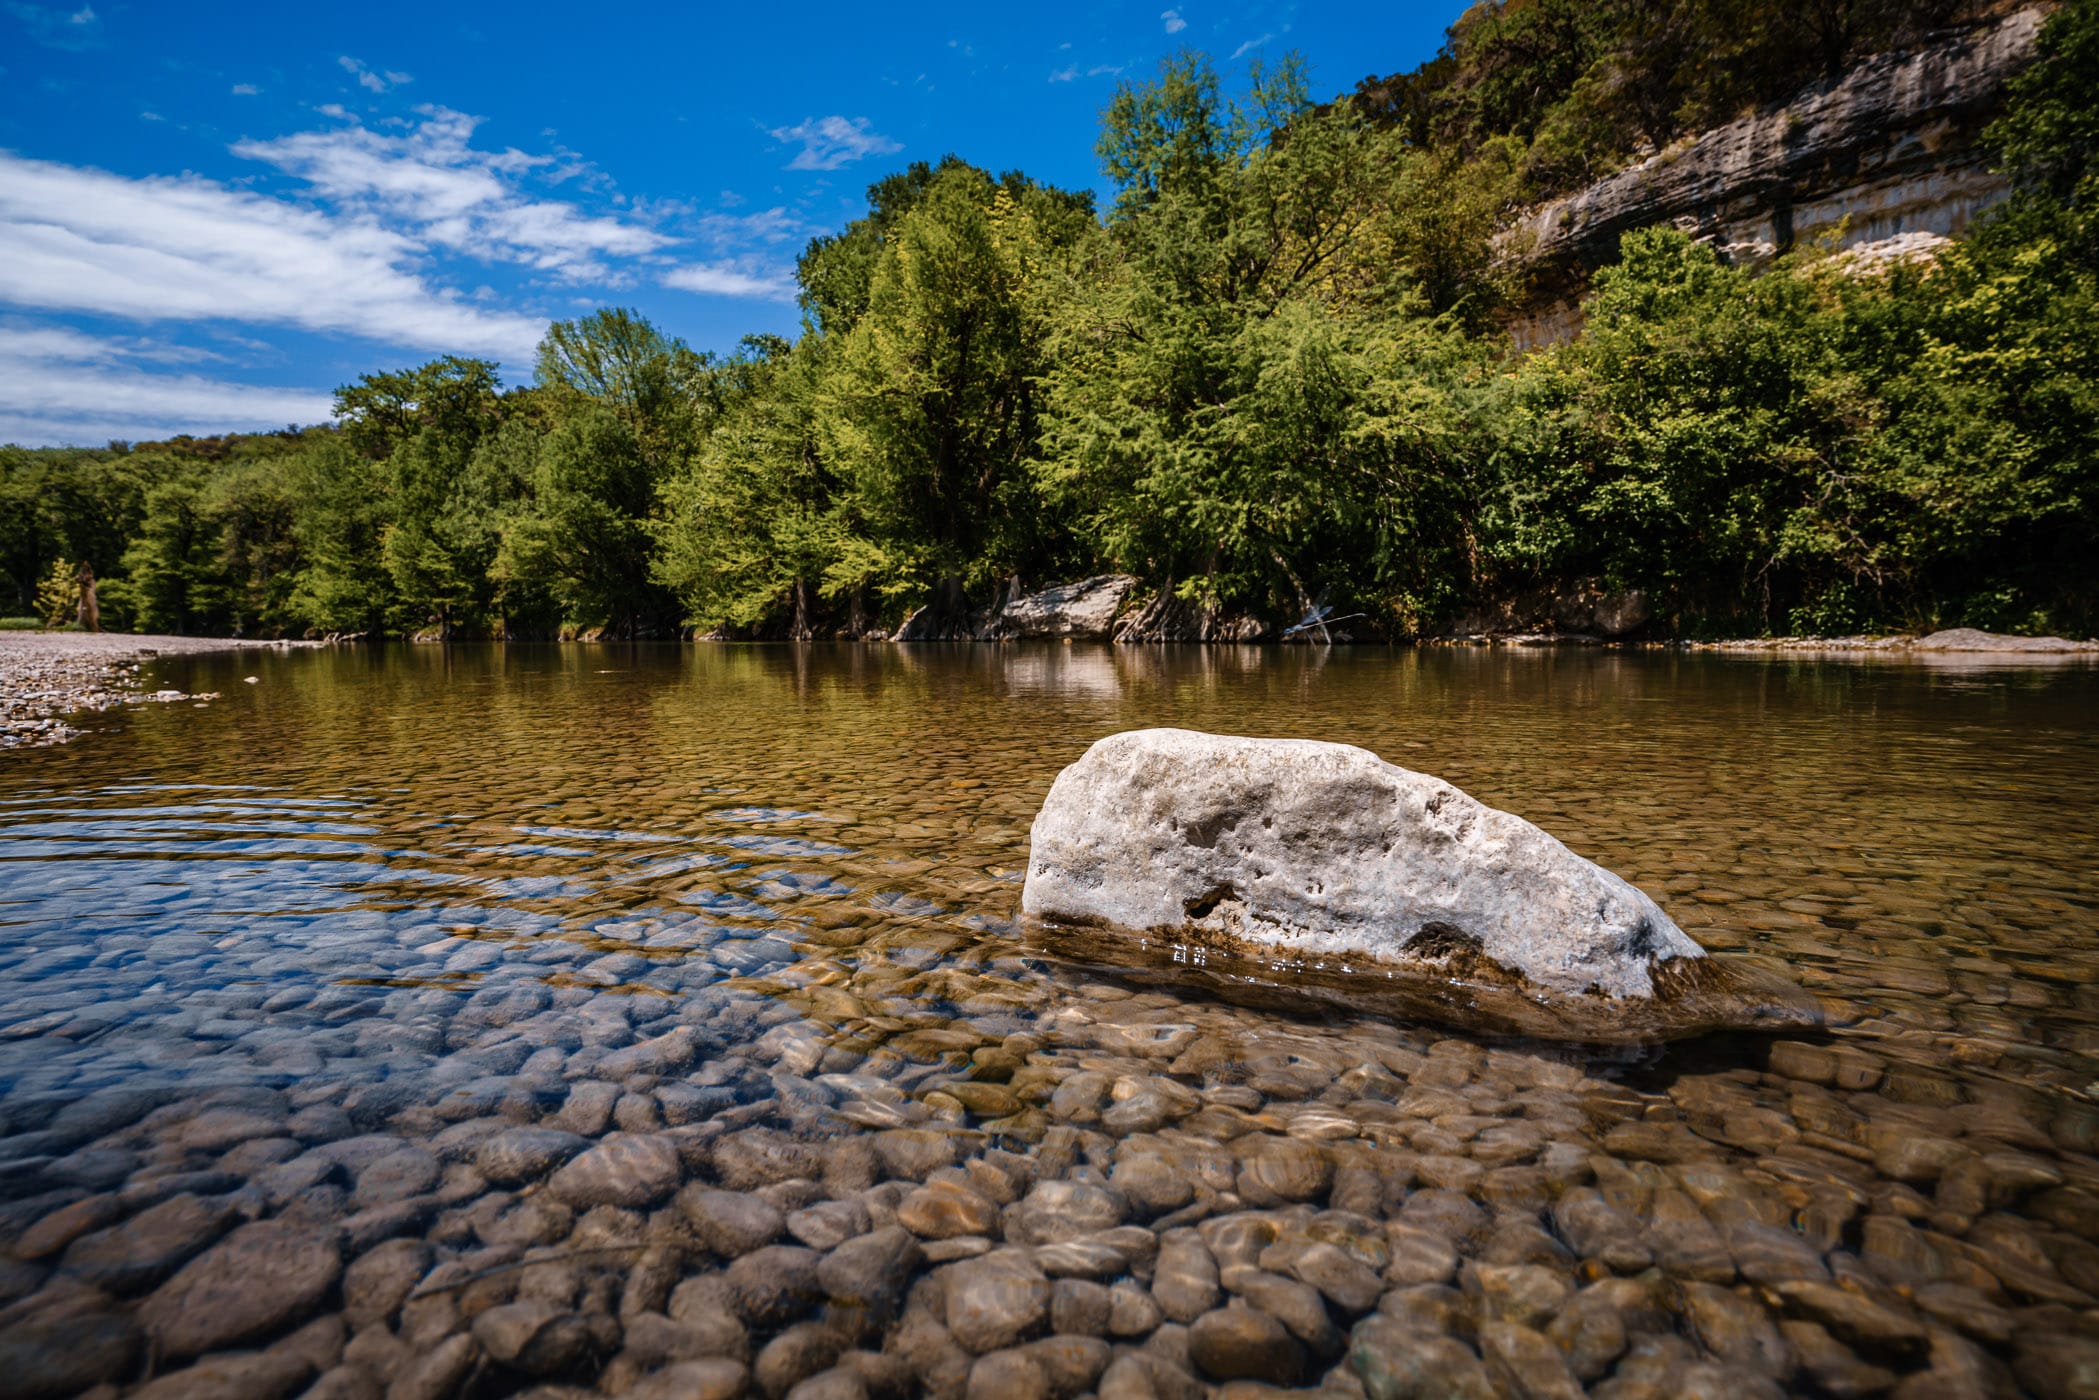 The rocky riverbed of Central Texas' Guadalupe River at Guadalupe River State Park.